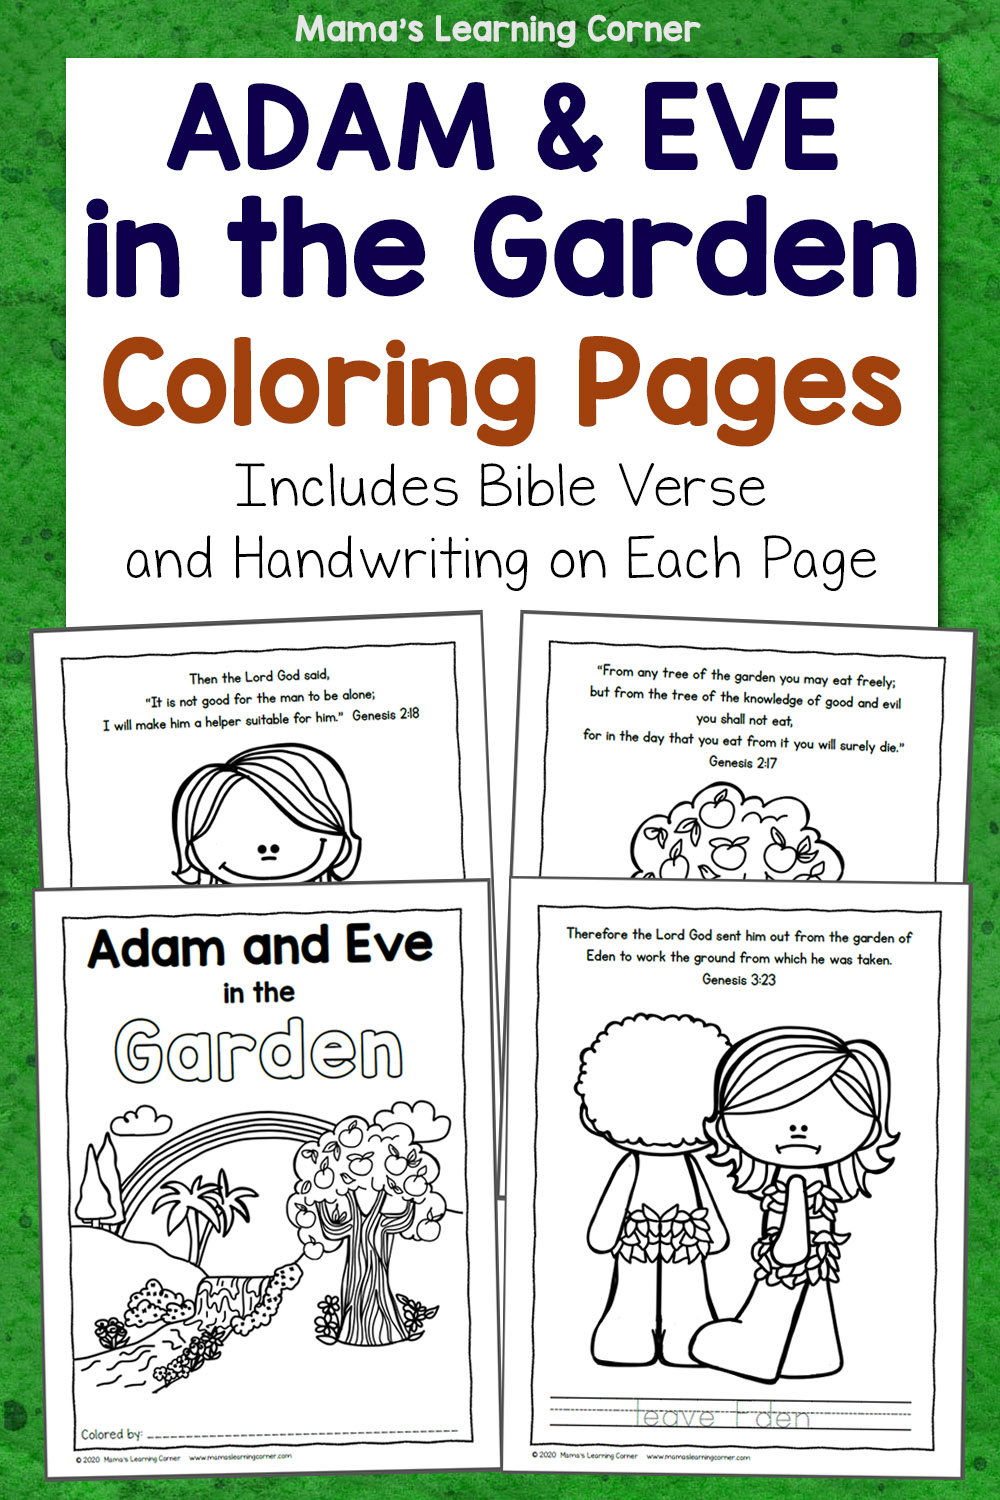 adam-and-eve-in-the-garden-coloring-pages-mamas-learning-corner